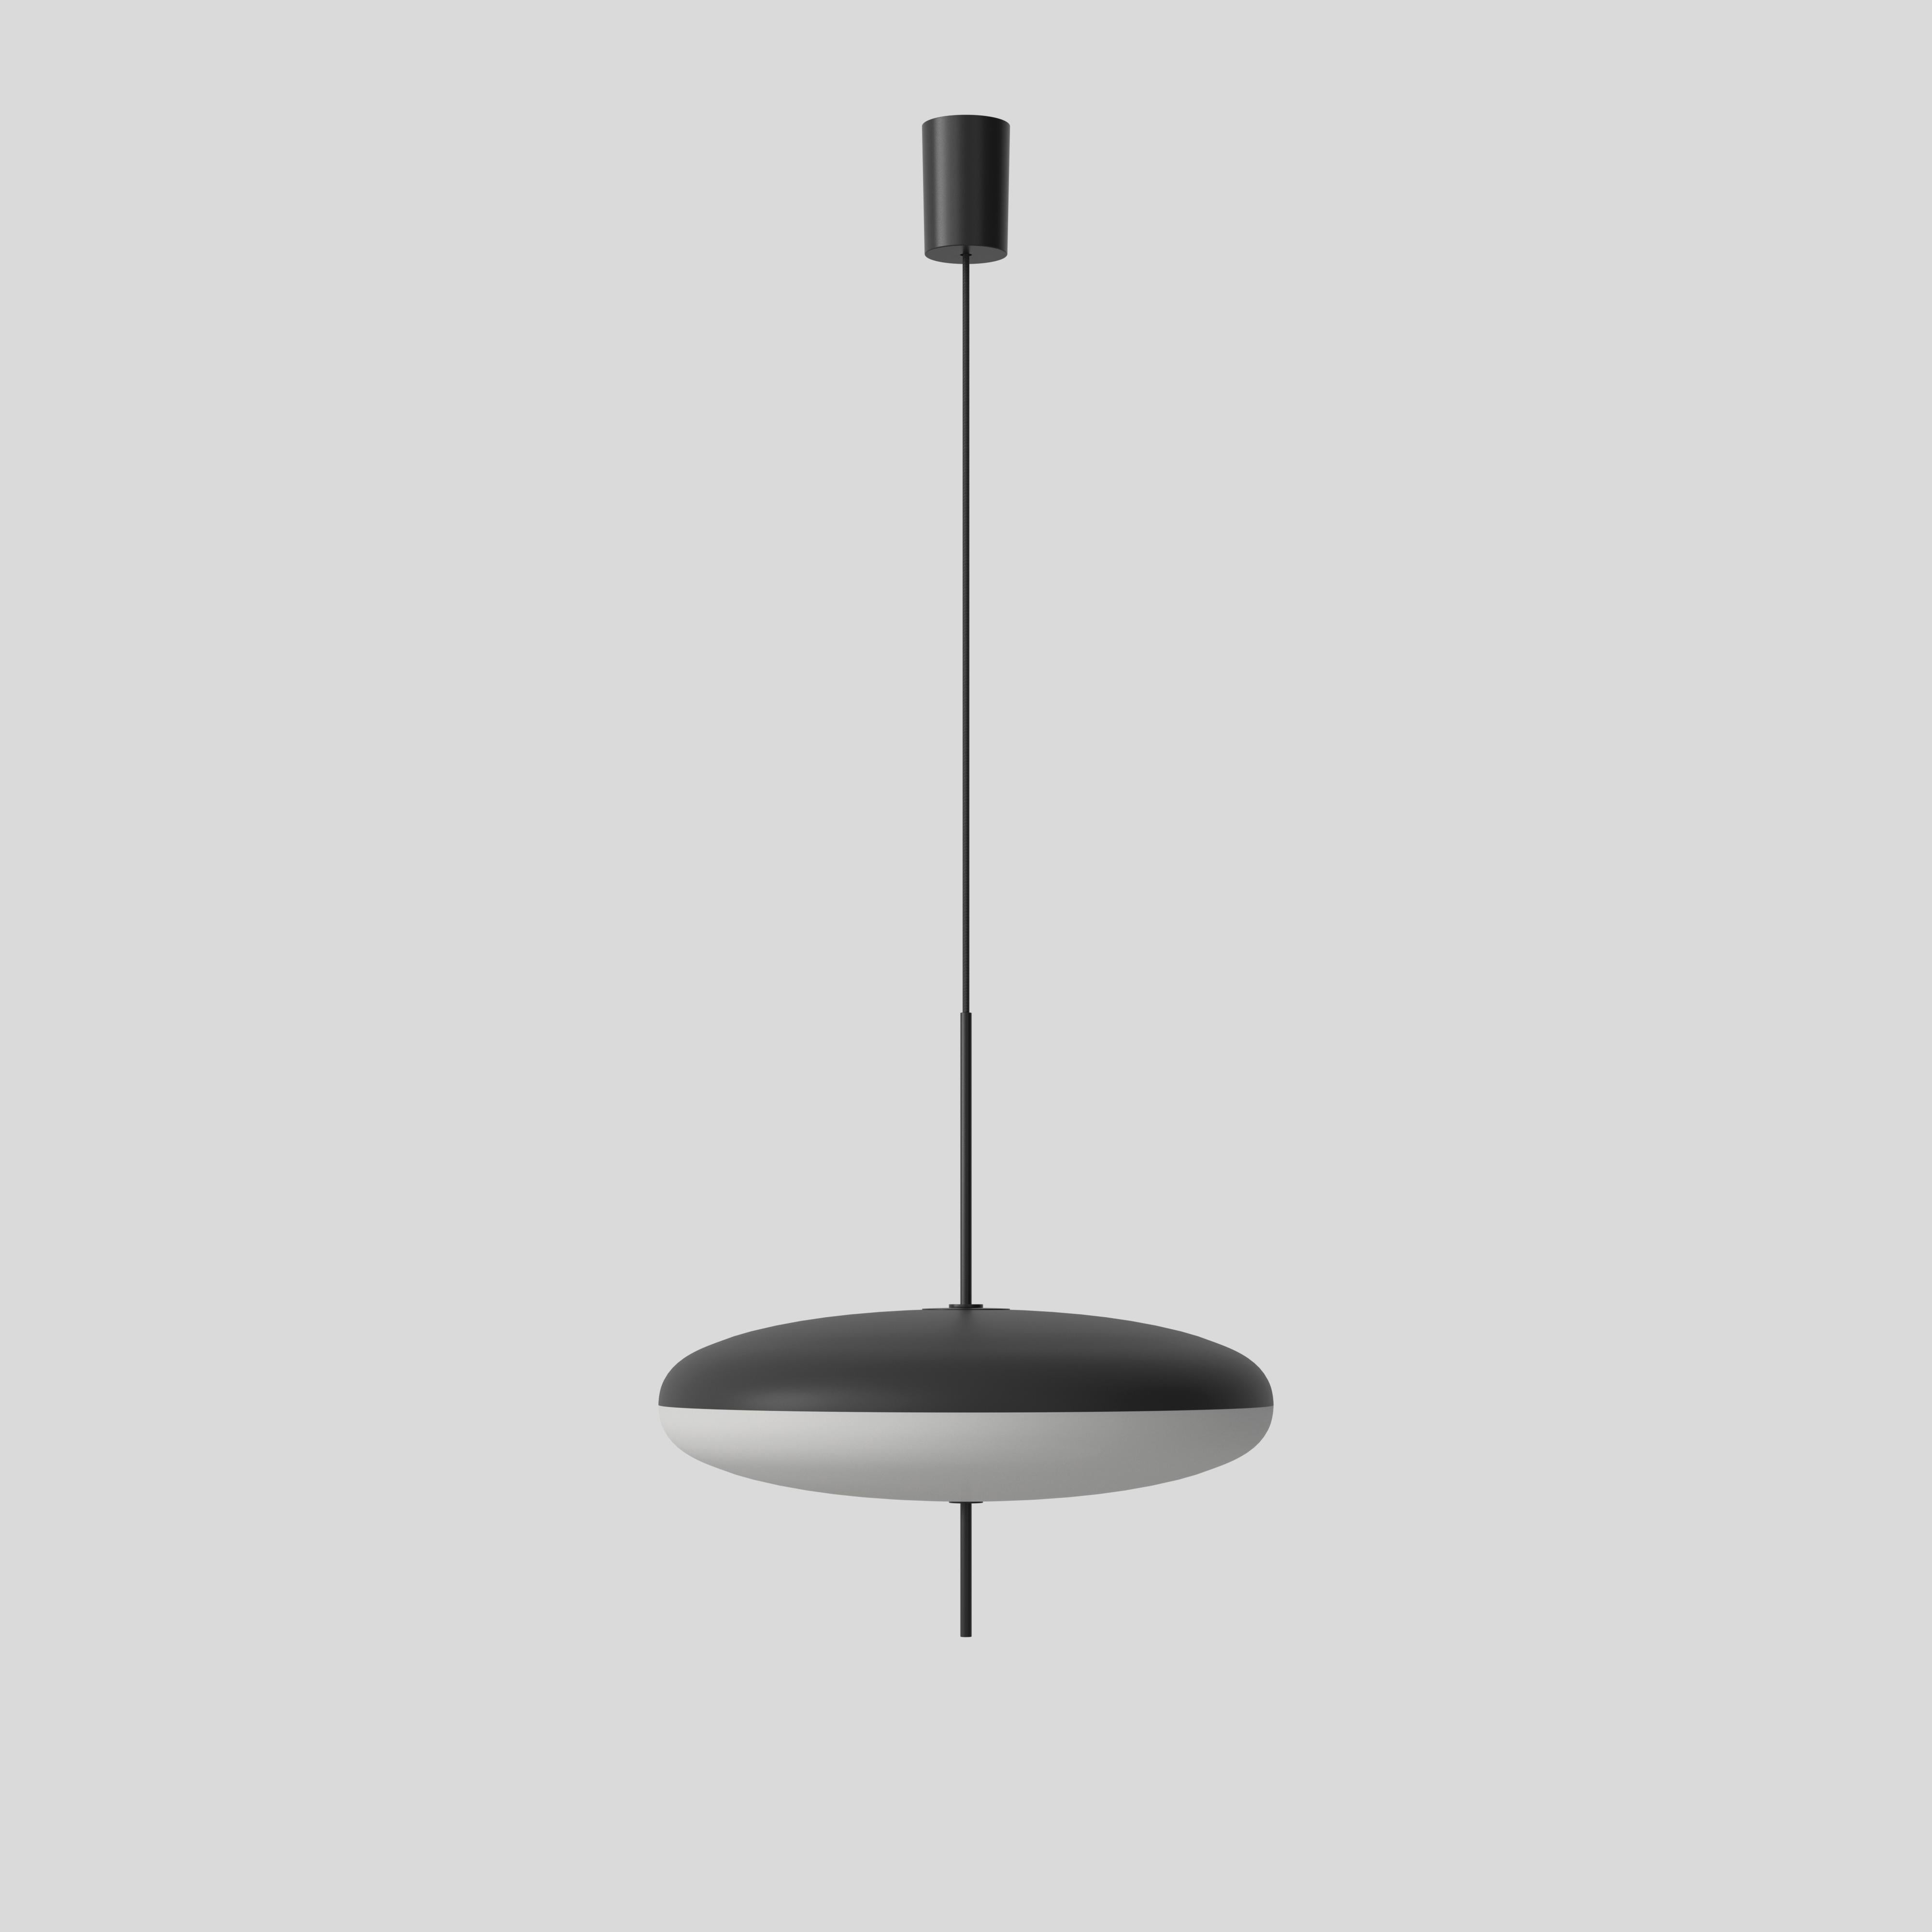 Gino Sarfatti lamp model 2065.
Black white diffuser, black hardware, black cable.
Manufactured by Astep

Model 2065
Design by Gino Sarfatti
The 2065 is made of two joined opaline methacrylate saucer-shaped diffusers suspended from the ceiling